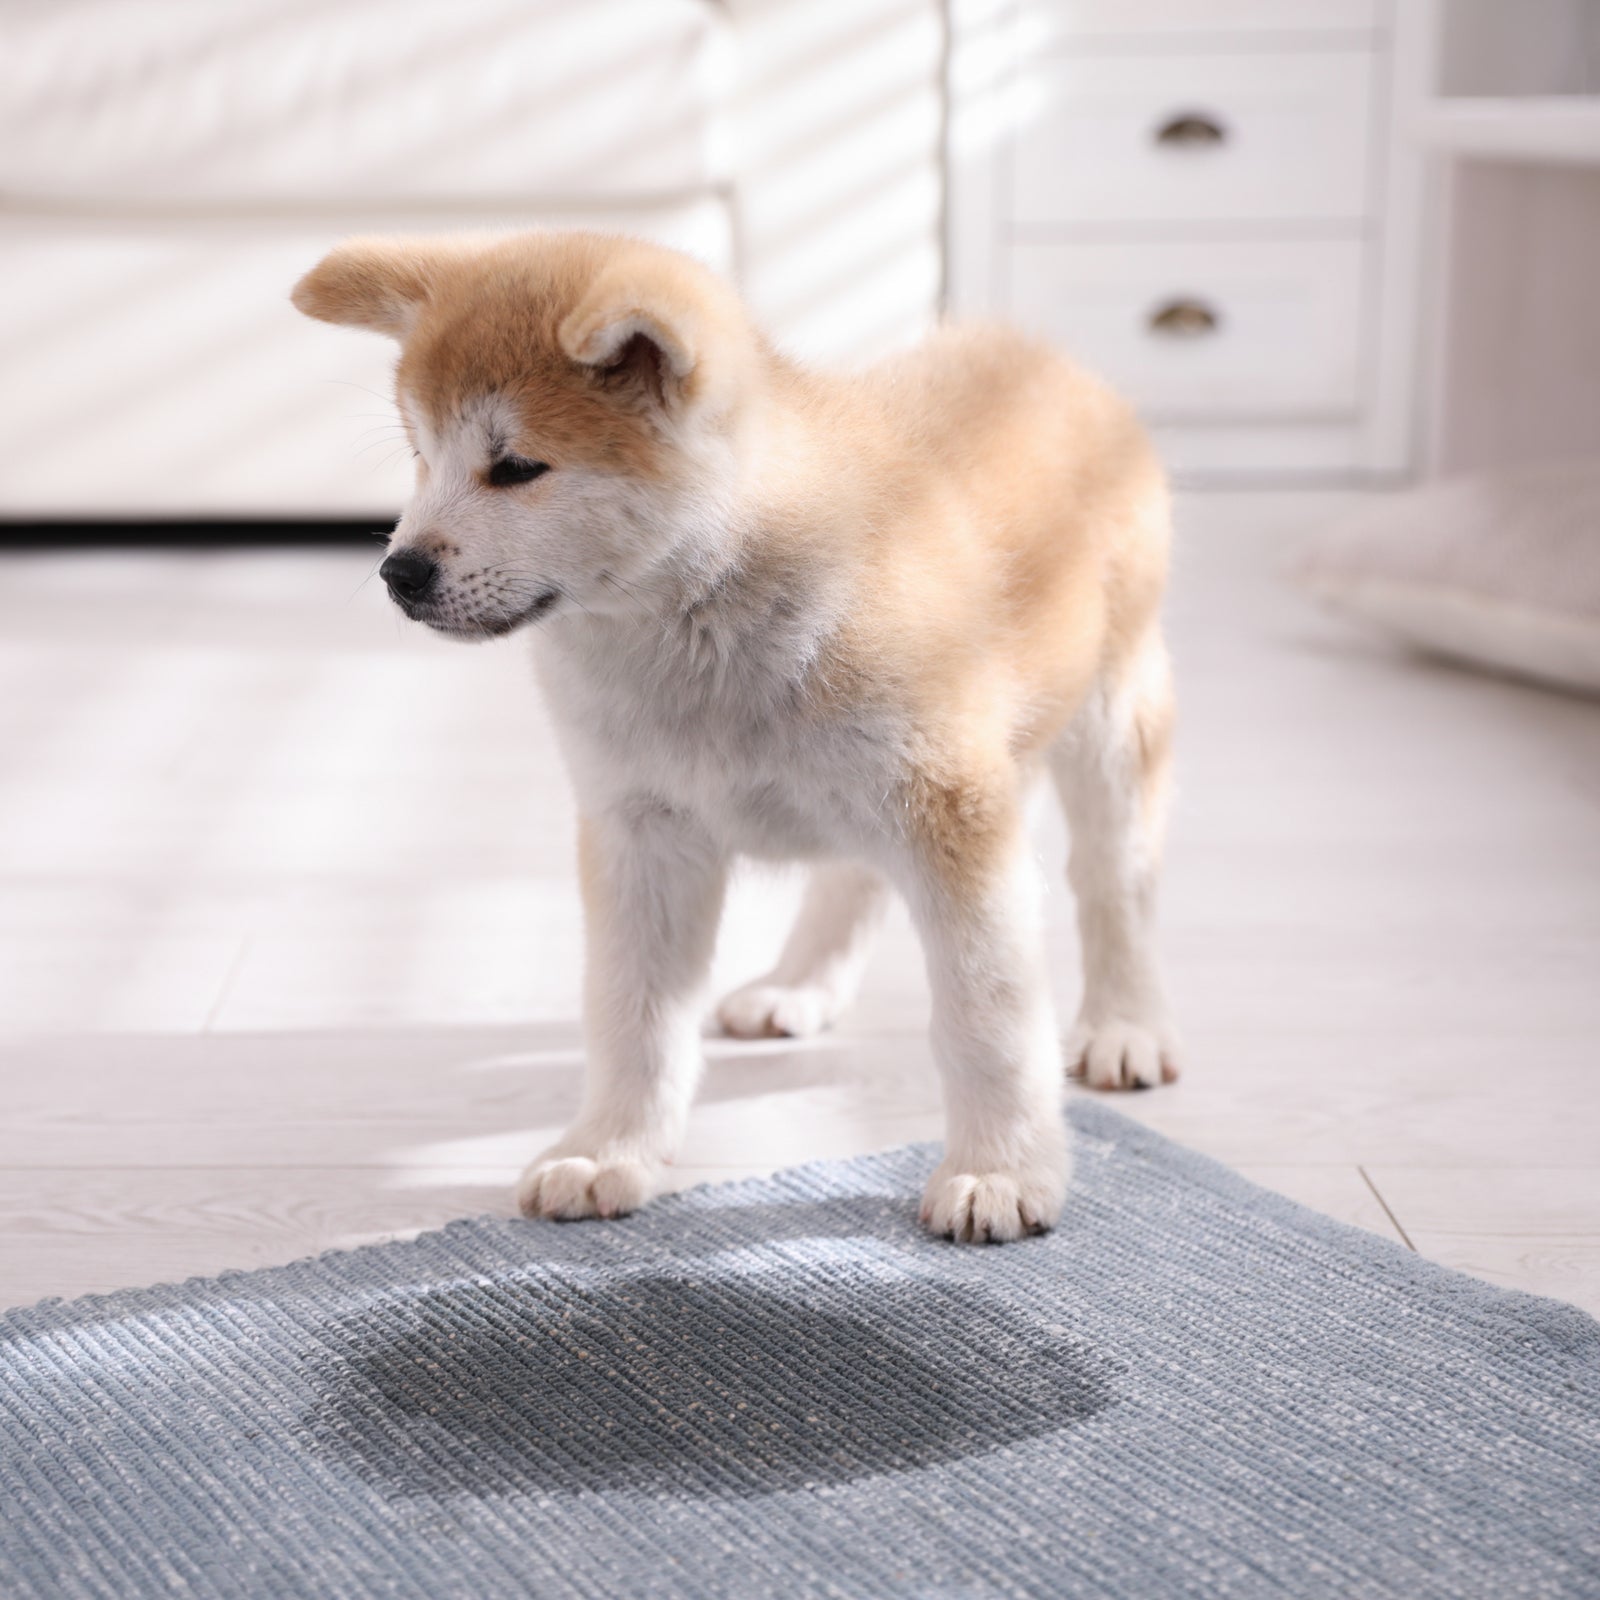 How to Remove Dried Dog Pee from Carpet: DIY Tips and Tricks